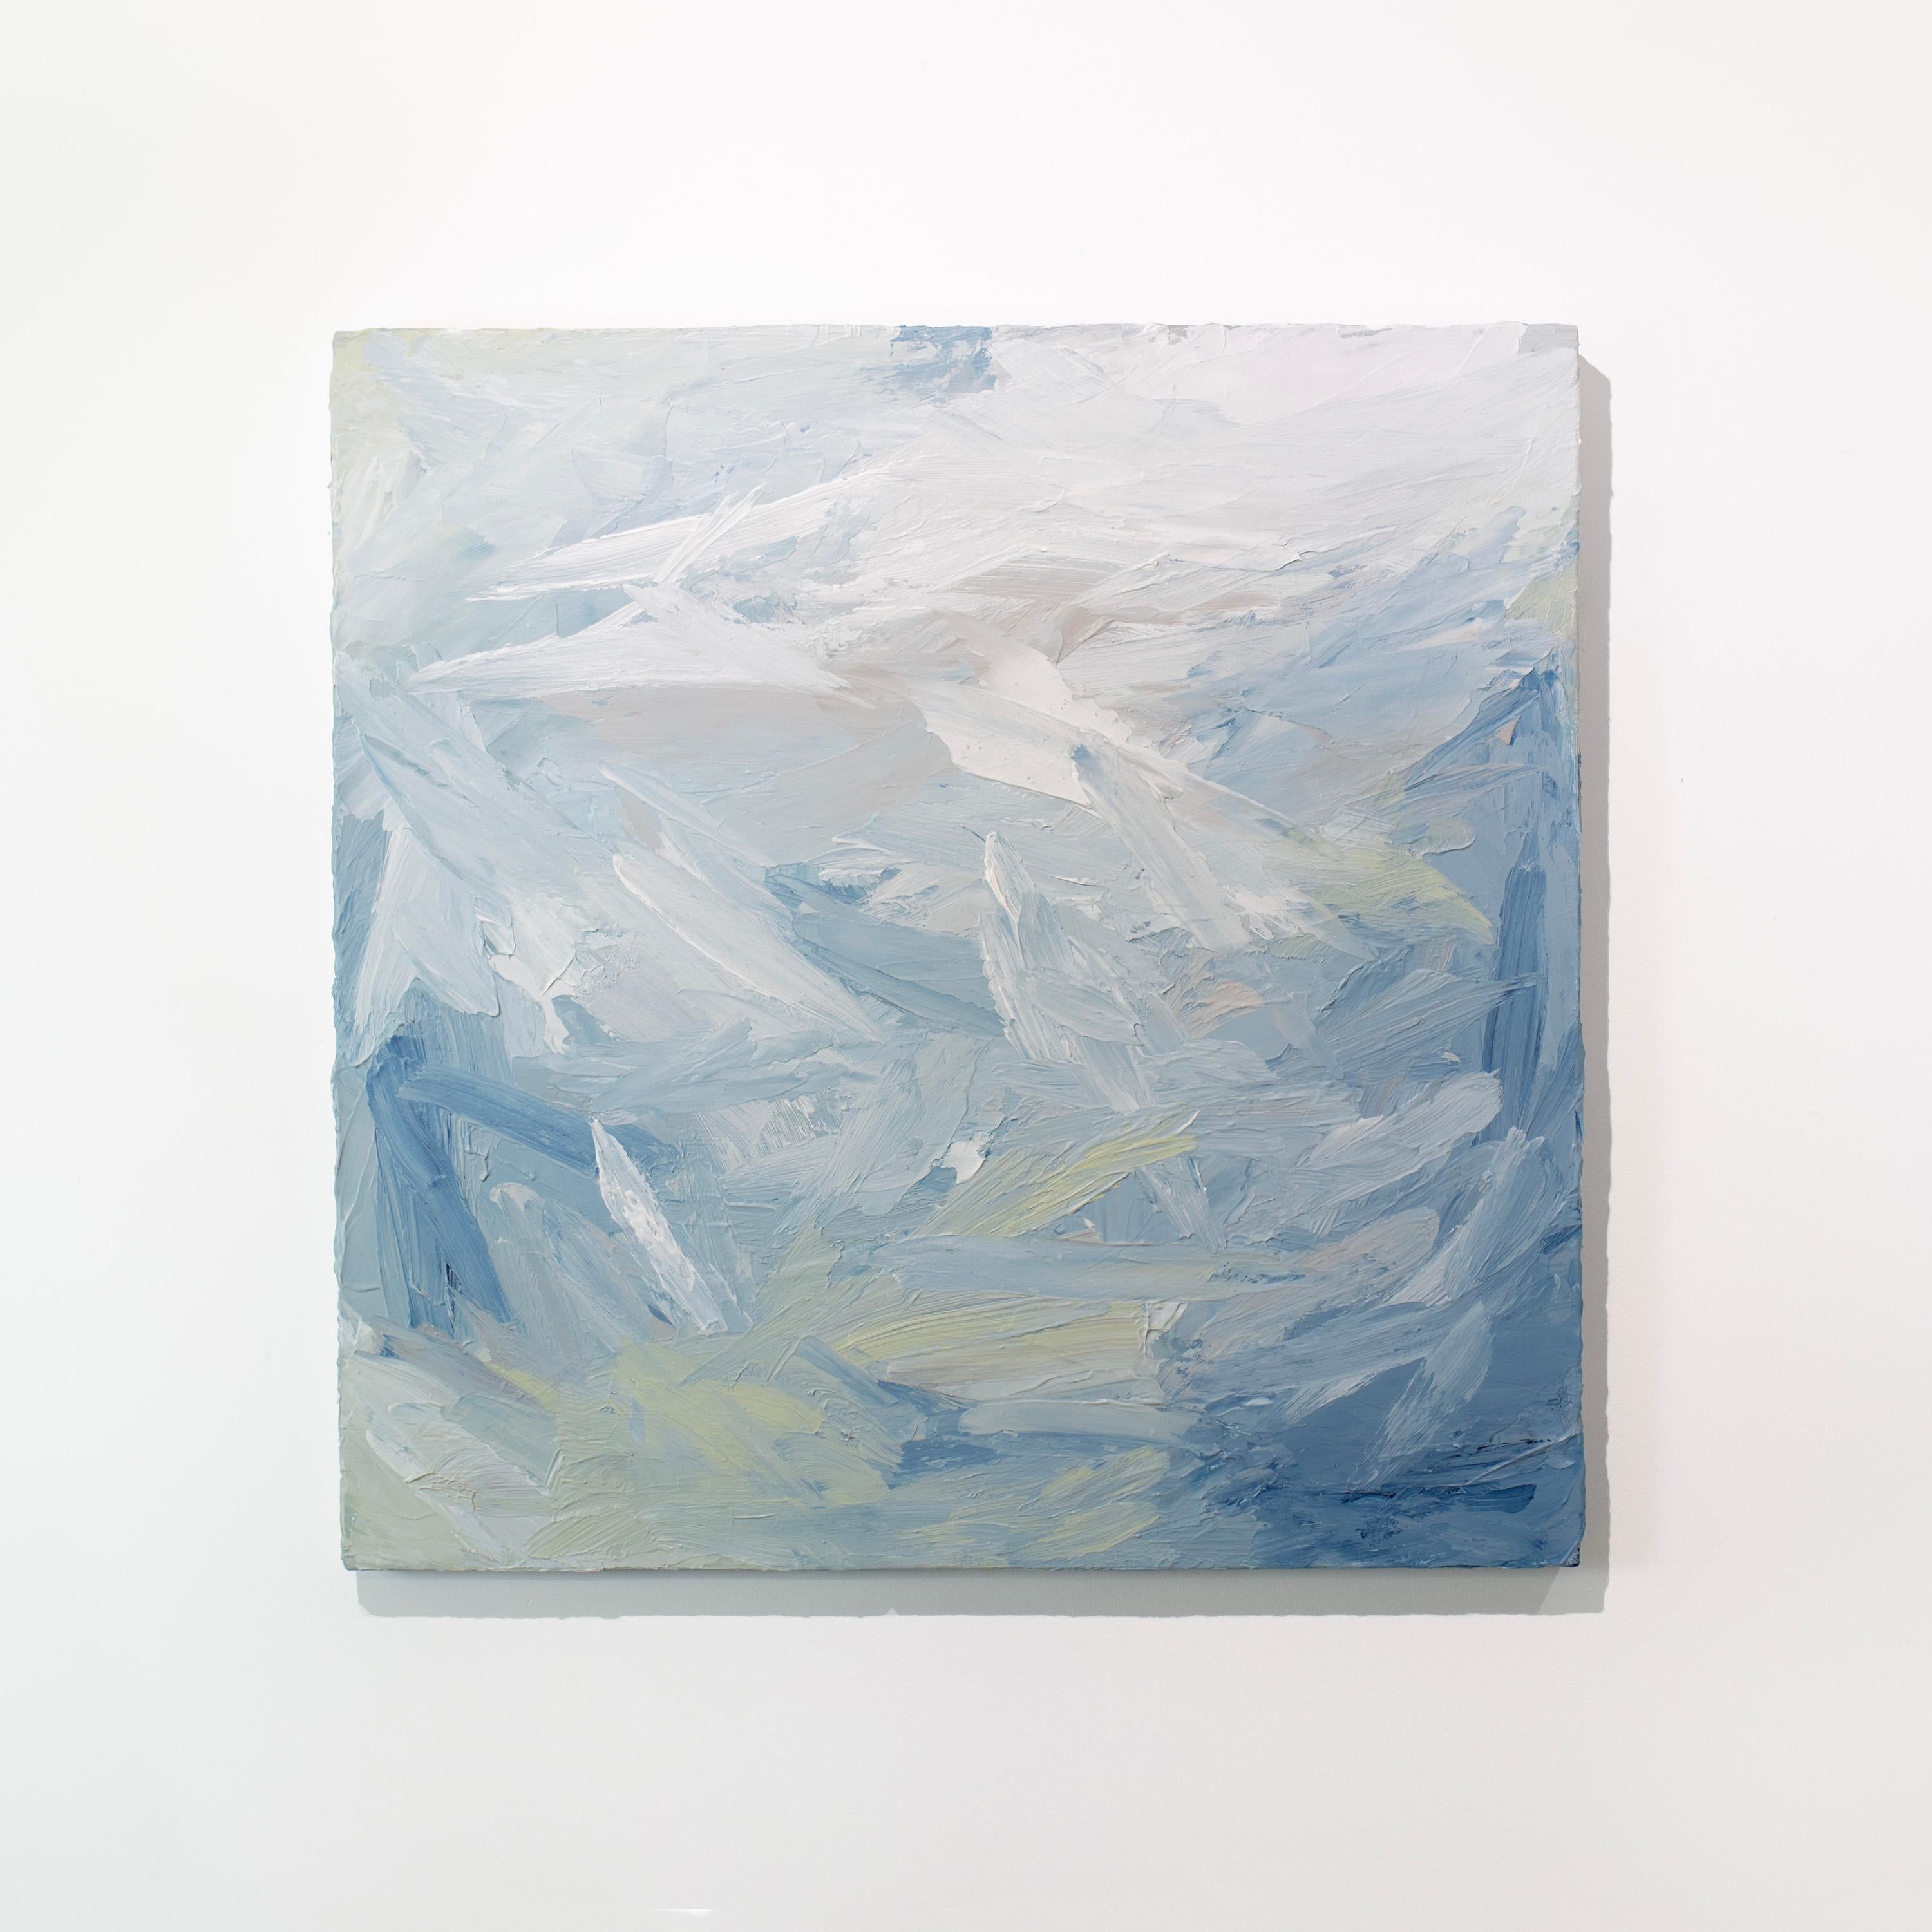 This abstract painting by Teodora Guererra features a light blue, green, and white palette. The artist layers thick strokes of paint using a palette knife in broad, sweeping strokes over gallery wrapped canvas, creating an energetic composition and